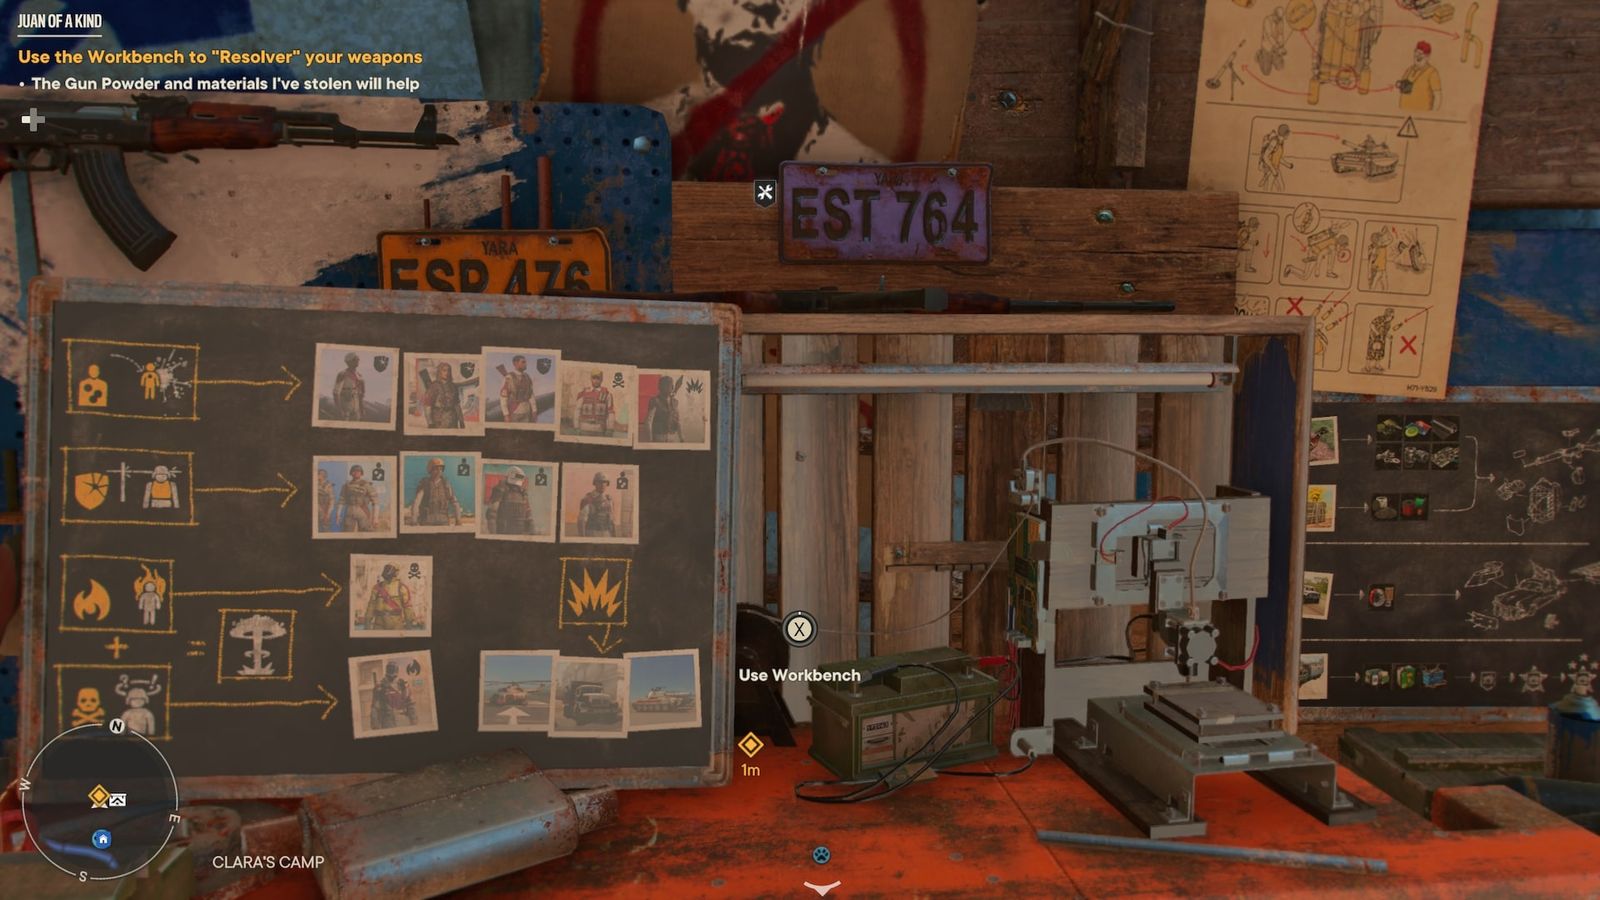 A Resolver Workbench at Clara's Camp in Far Cry 6.